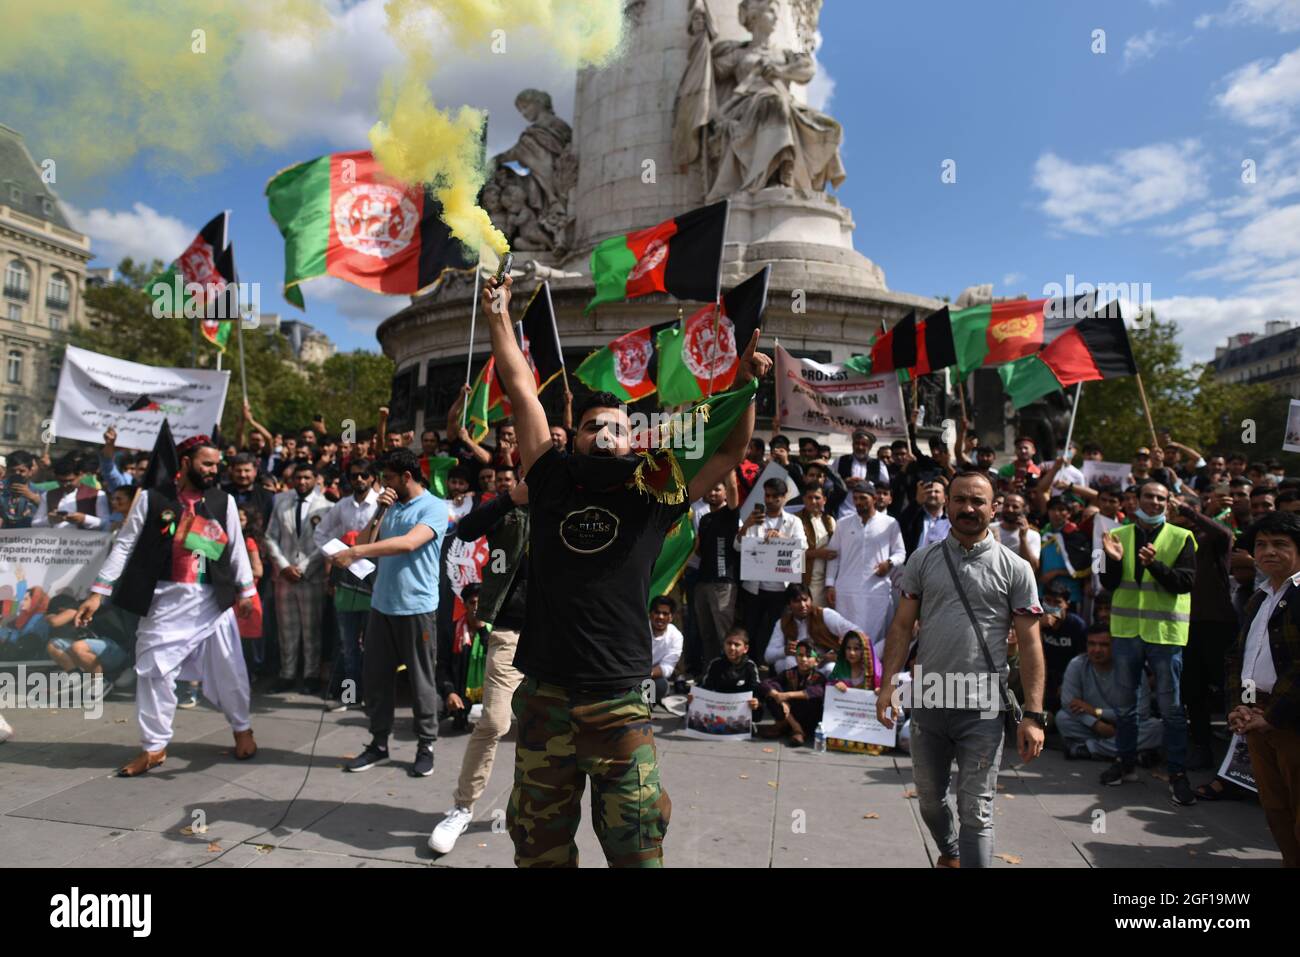 *** STRICTLY NO SALES TO FRENCH MEDIA OR PUBLISHERS - RIGHTS RESERVED ***August 22, 2021 - Paris, France: Hundreds of Afghan and French people gather in Place de la Republique to protest against the Taliban takeover of Afghanistan and demand a safe evacuation for Afghan people and their family from Kabul airport. Stock Photo